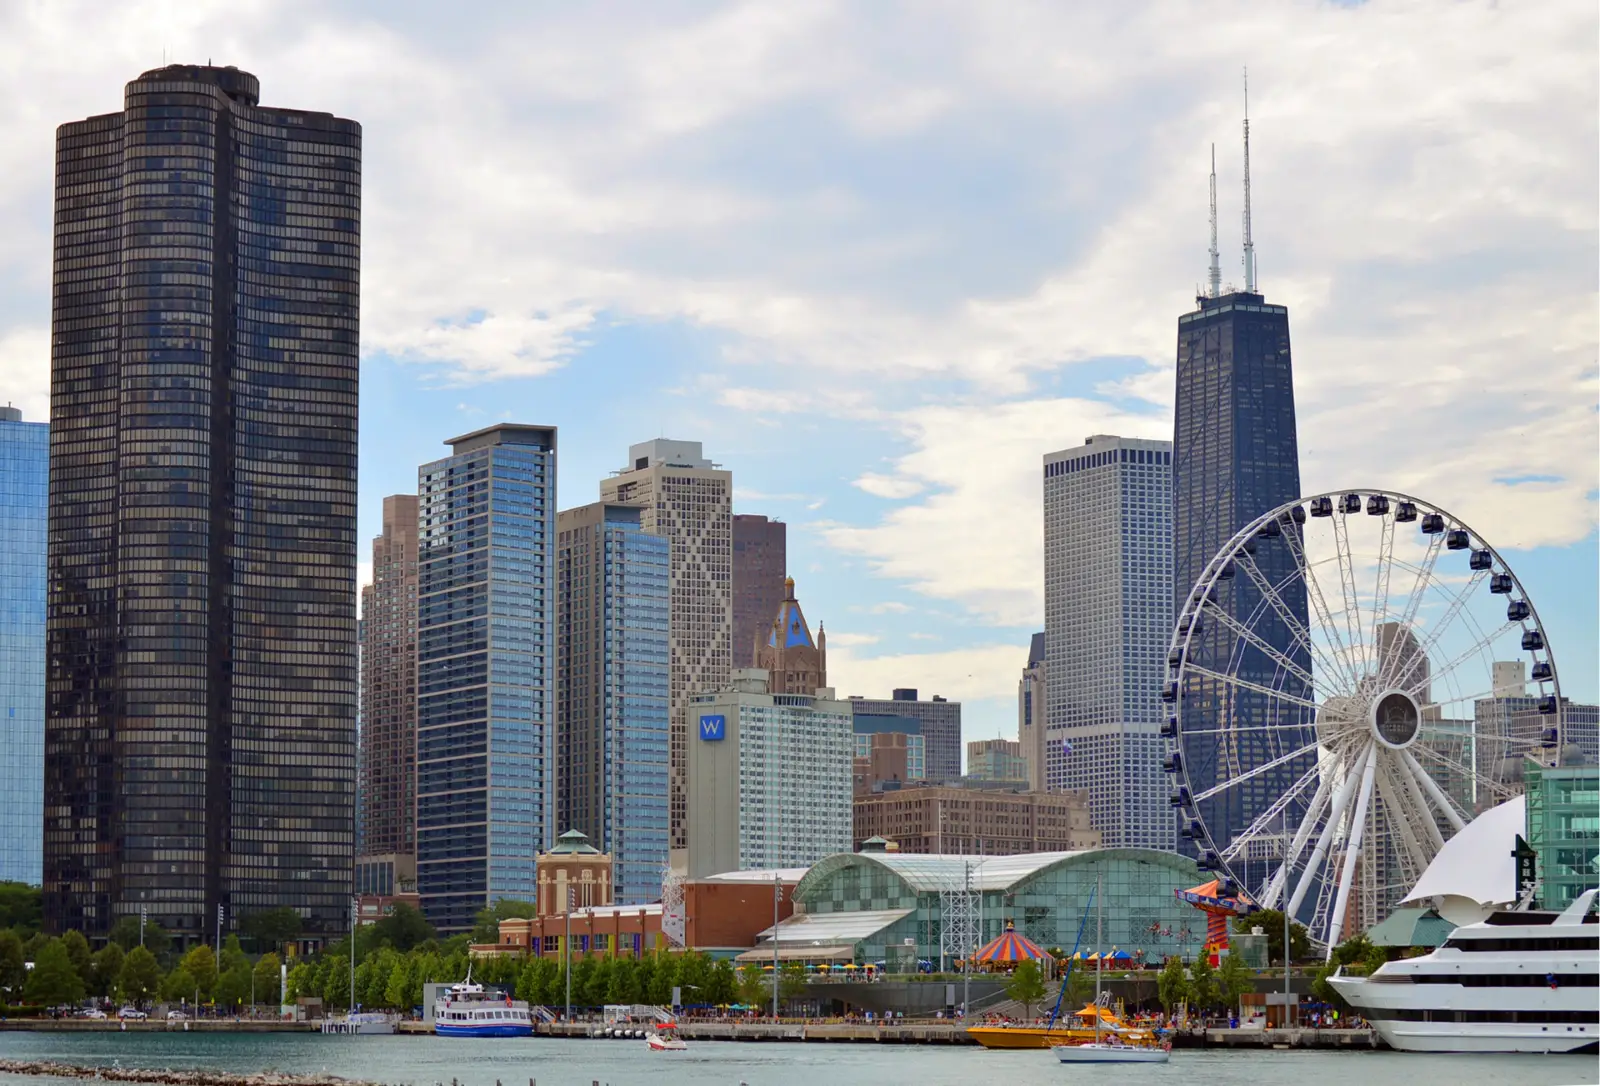 Downtown Chicago on a sunny day with blue skies at navy pier with the Ferris wheel, docked luxury shop, and bright umbrellas on the river